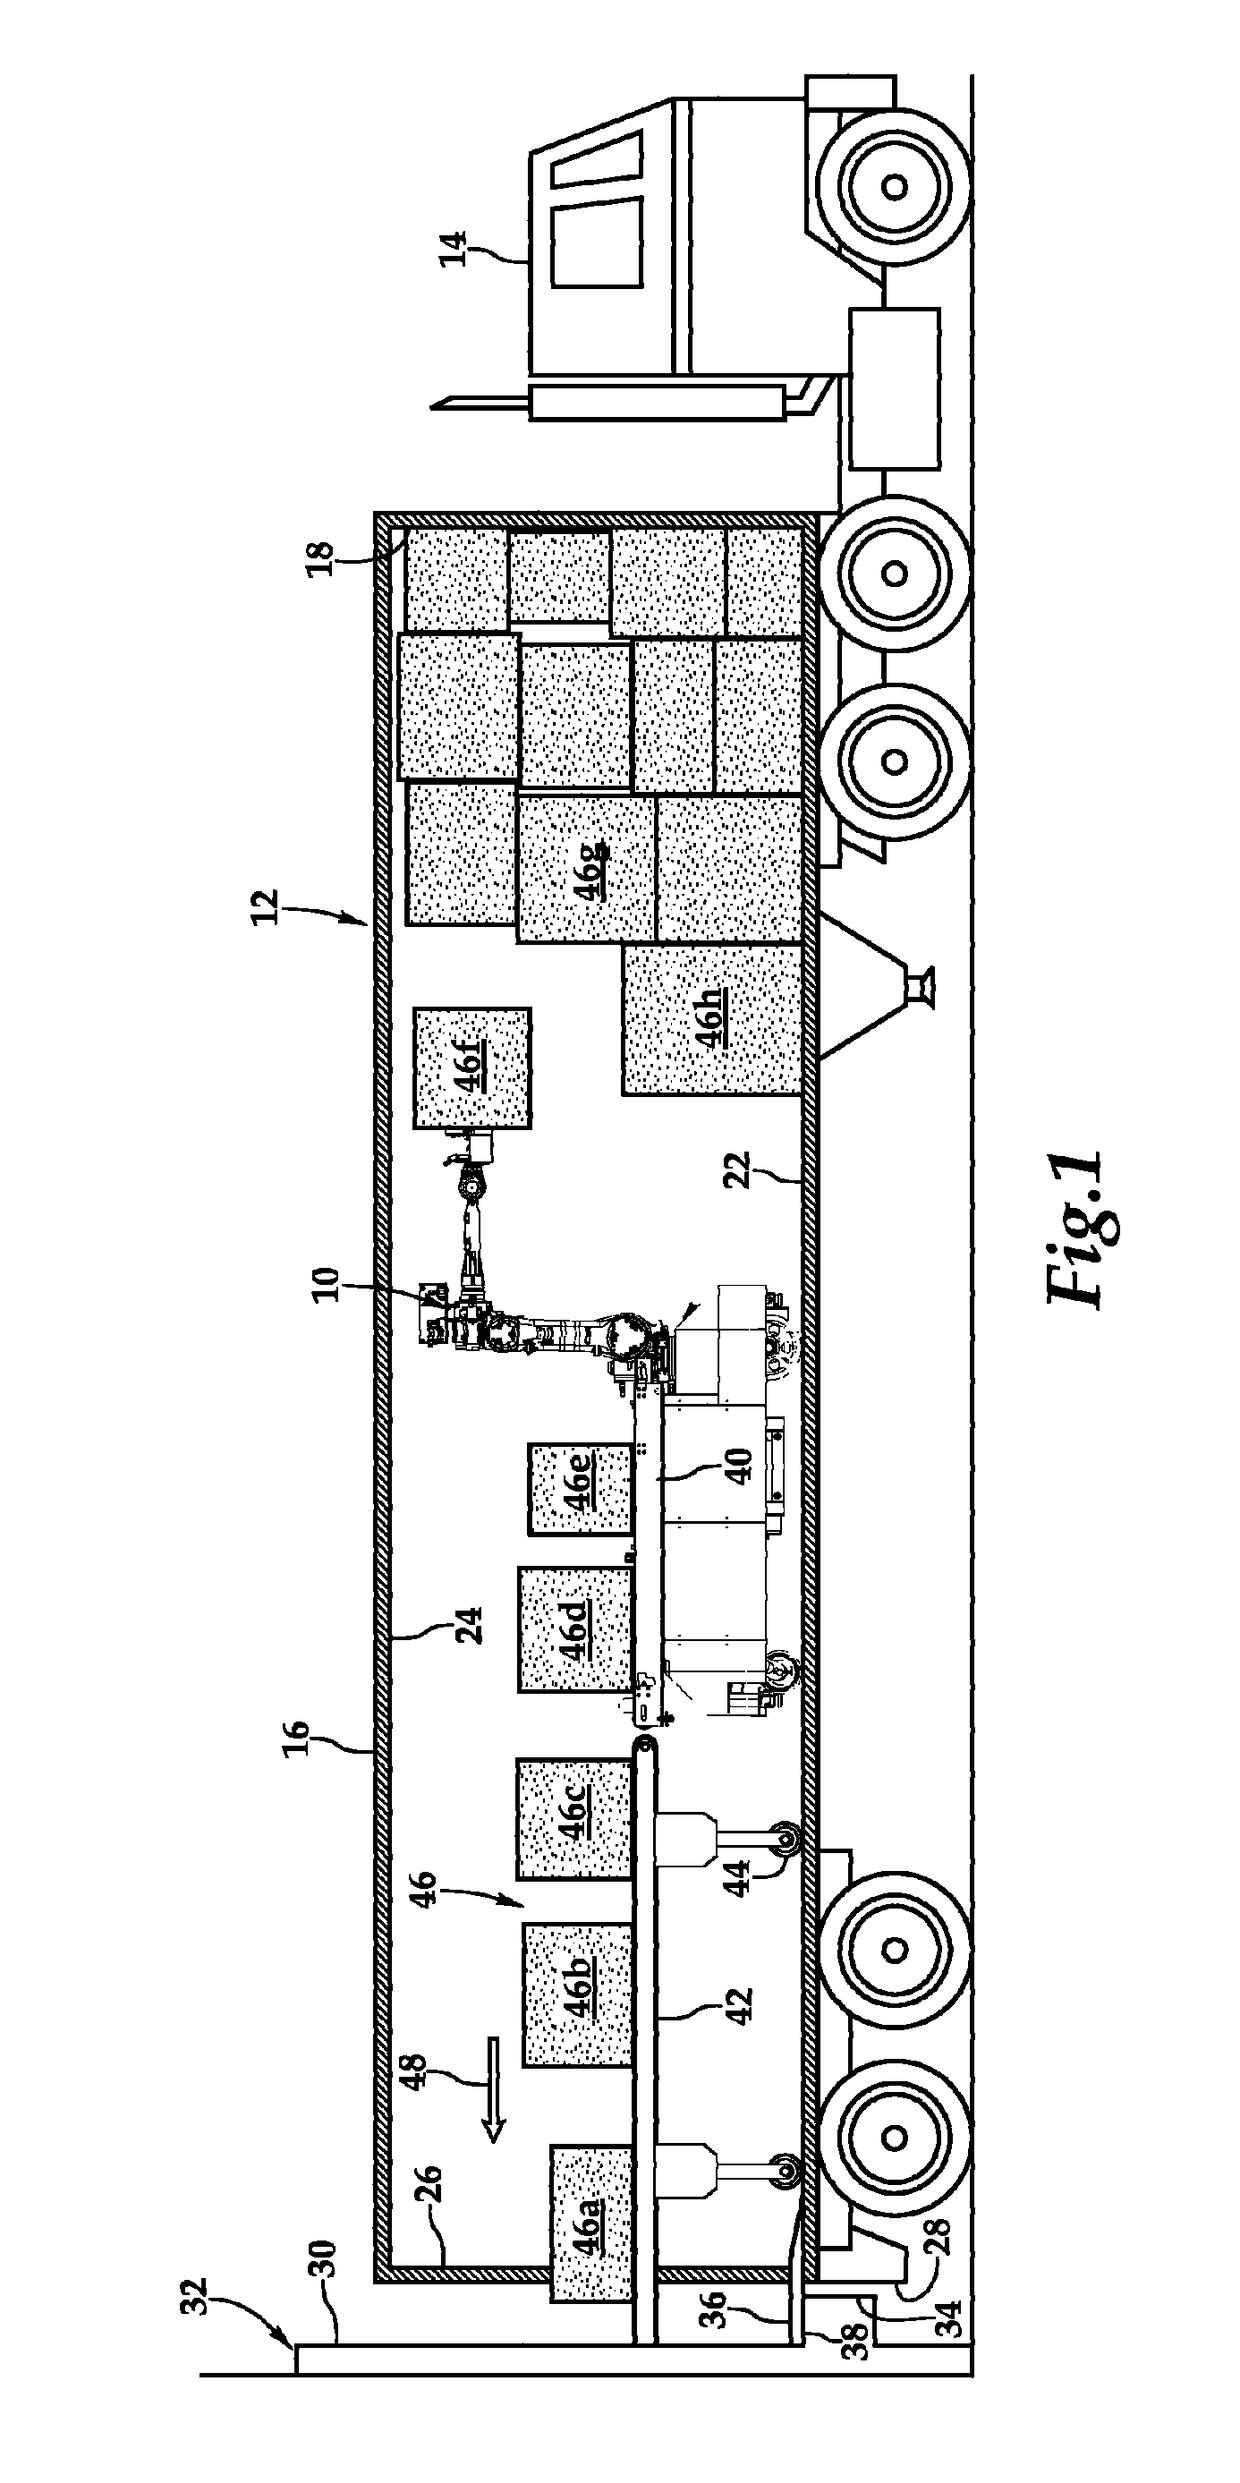 Perception-based robotic manipulation system and method for automated truck unloader that unloads/unpacks product from trailers and containers